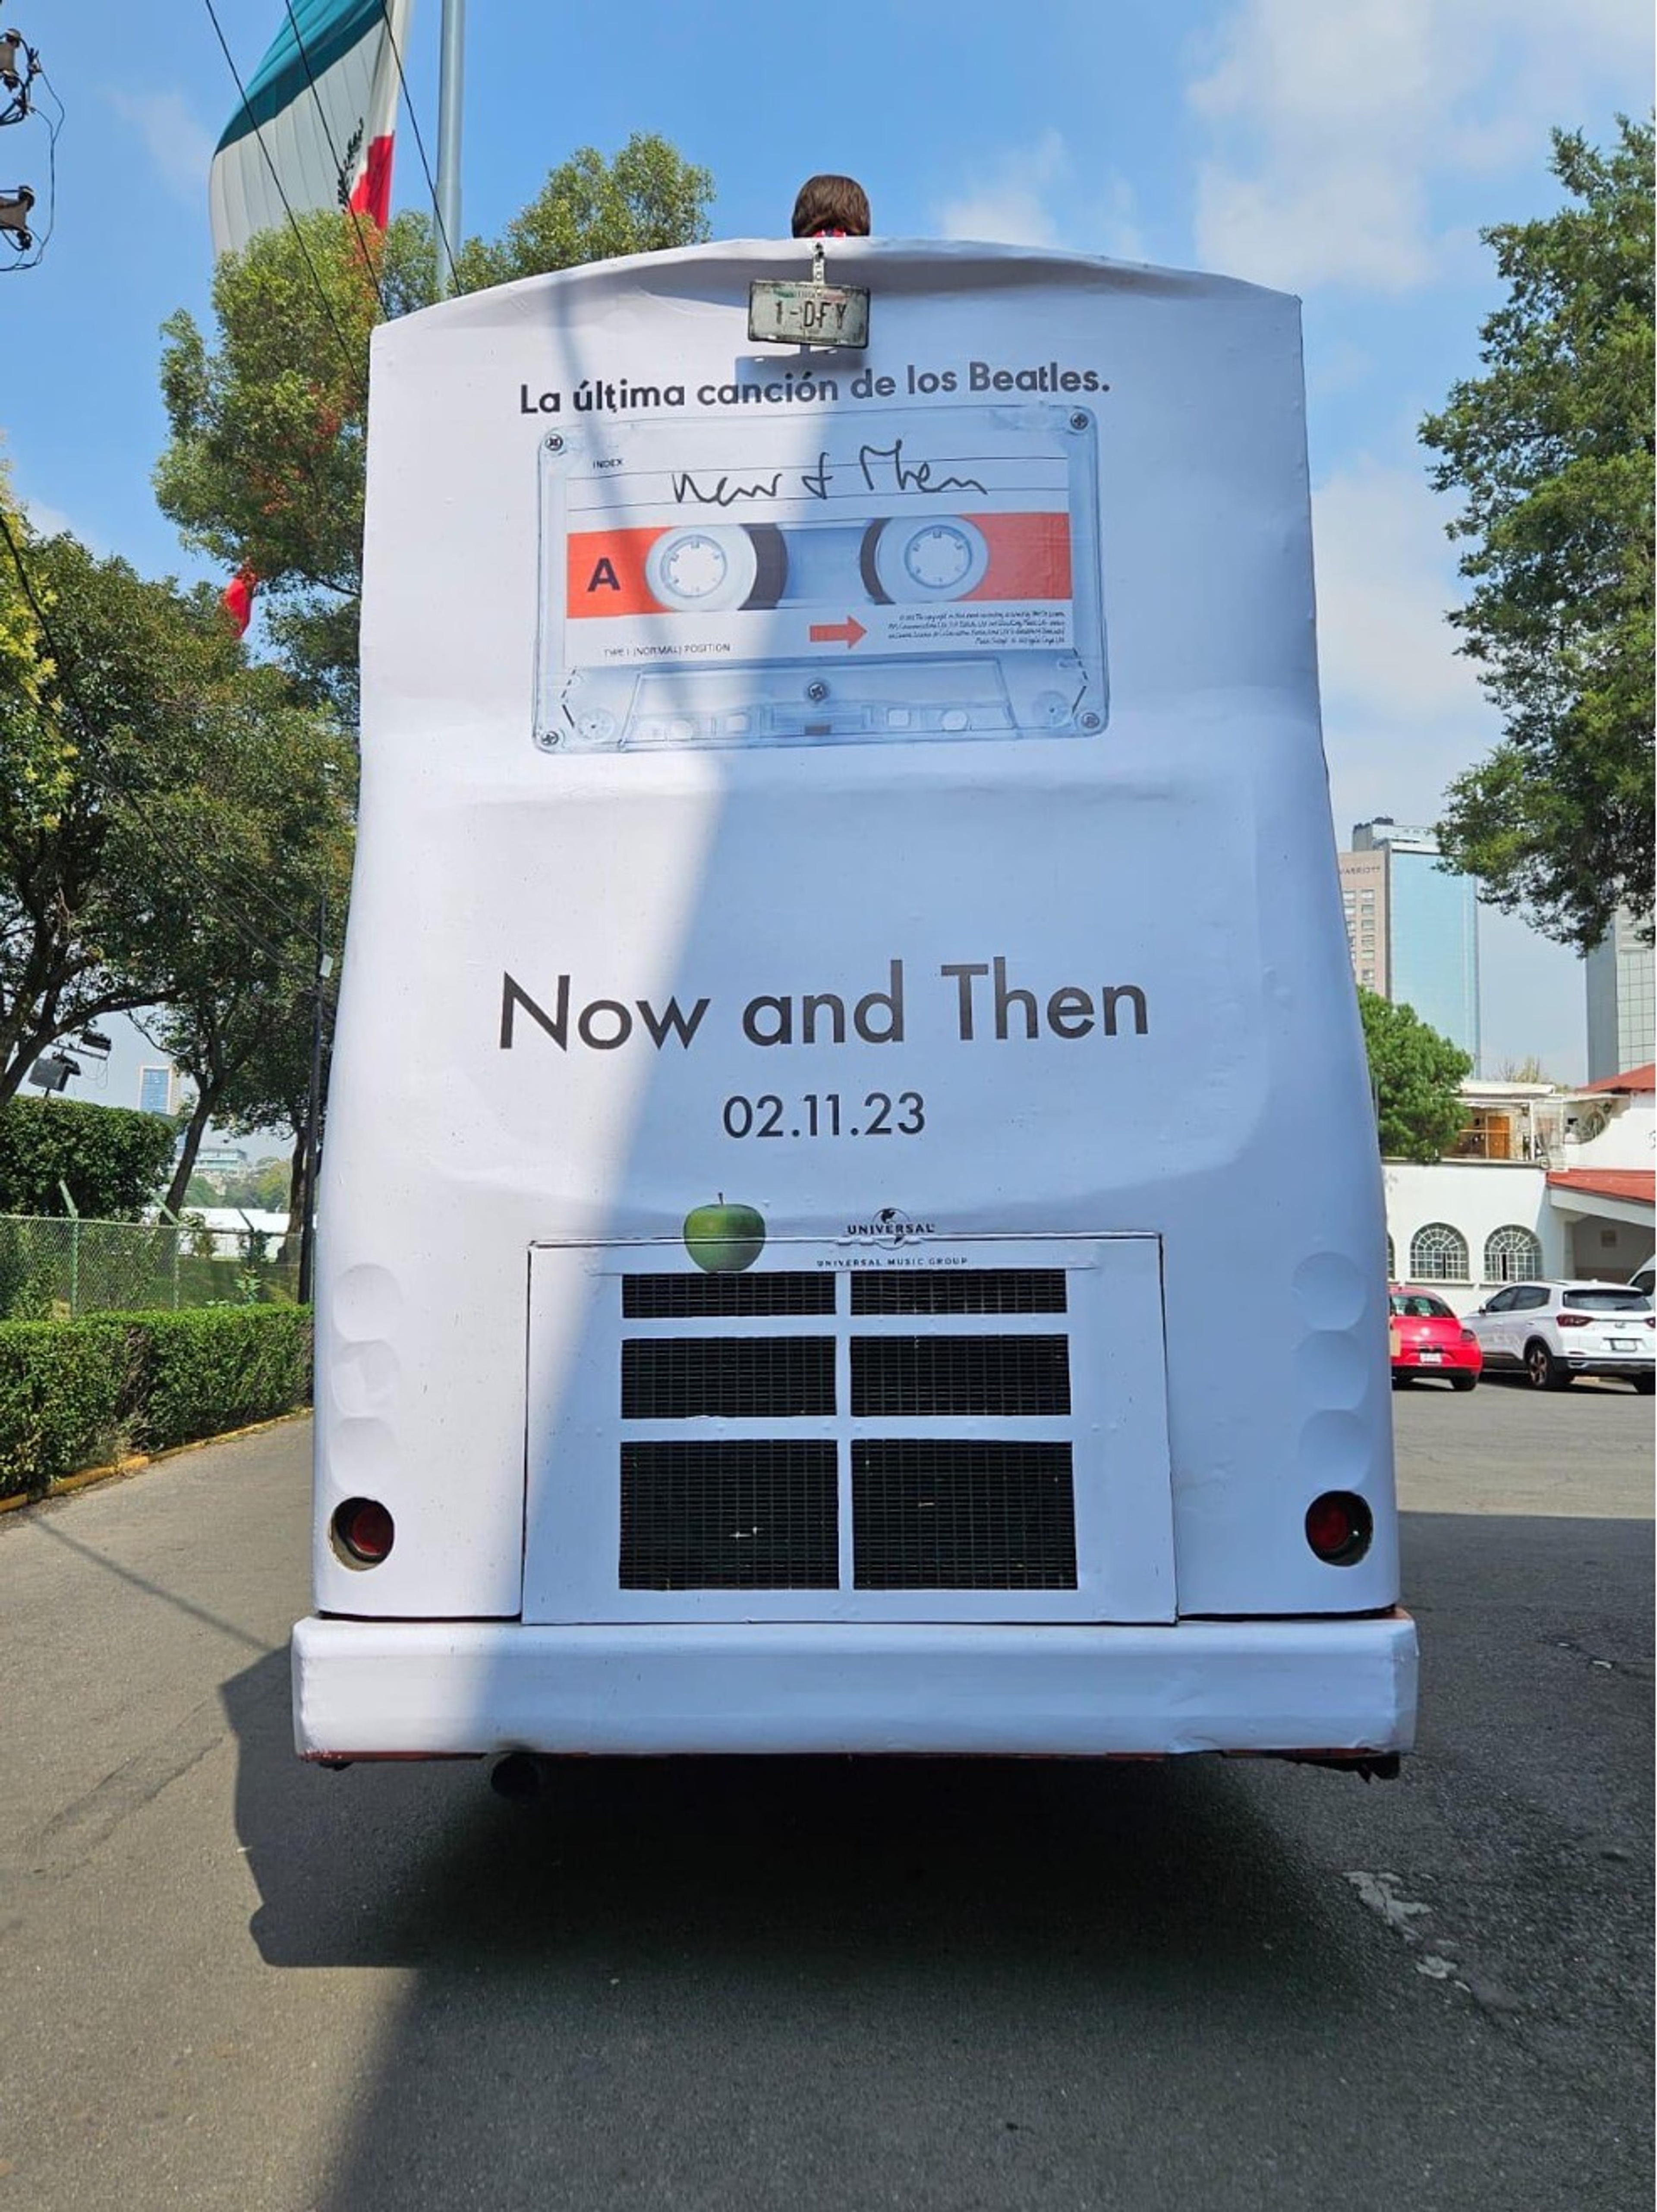 A bus with 'Now and Then' advertisement on it in Mexico, photo taken by Stuart Bell